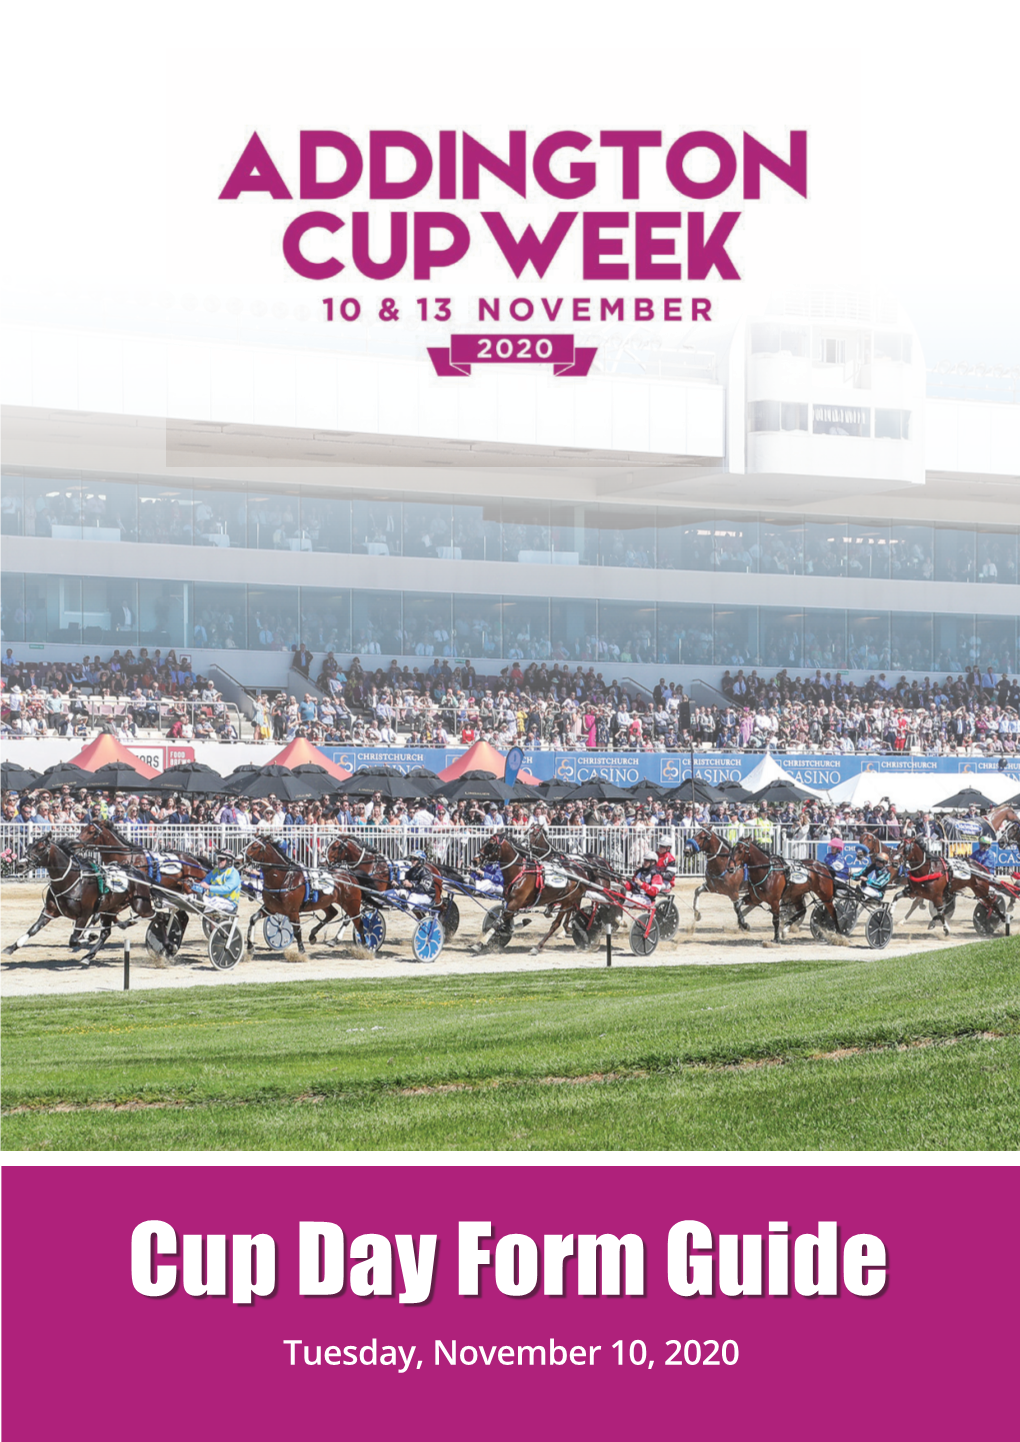 Cup Day Form Guide Tuesday, November 10, 2020